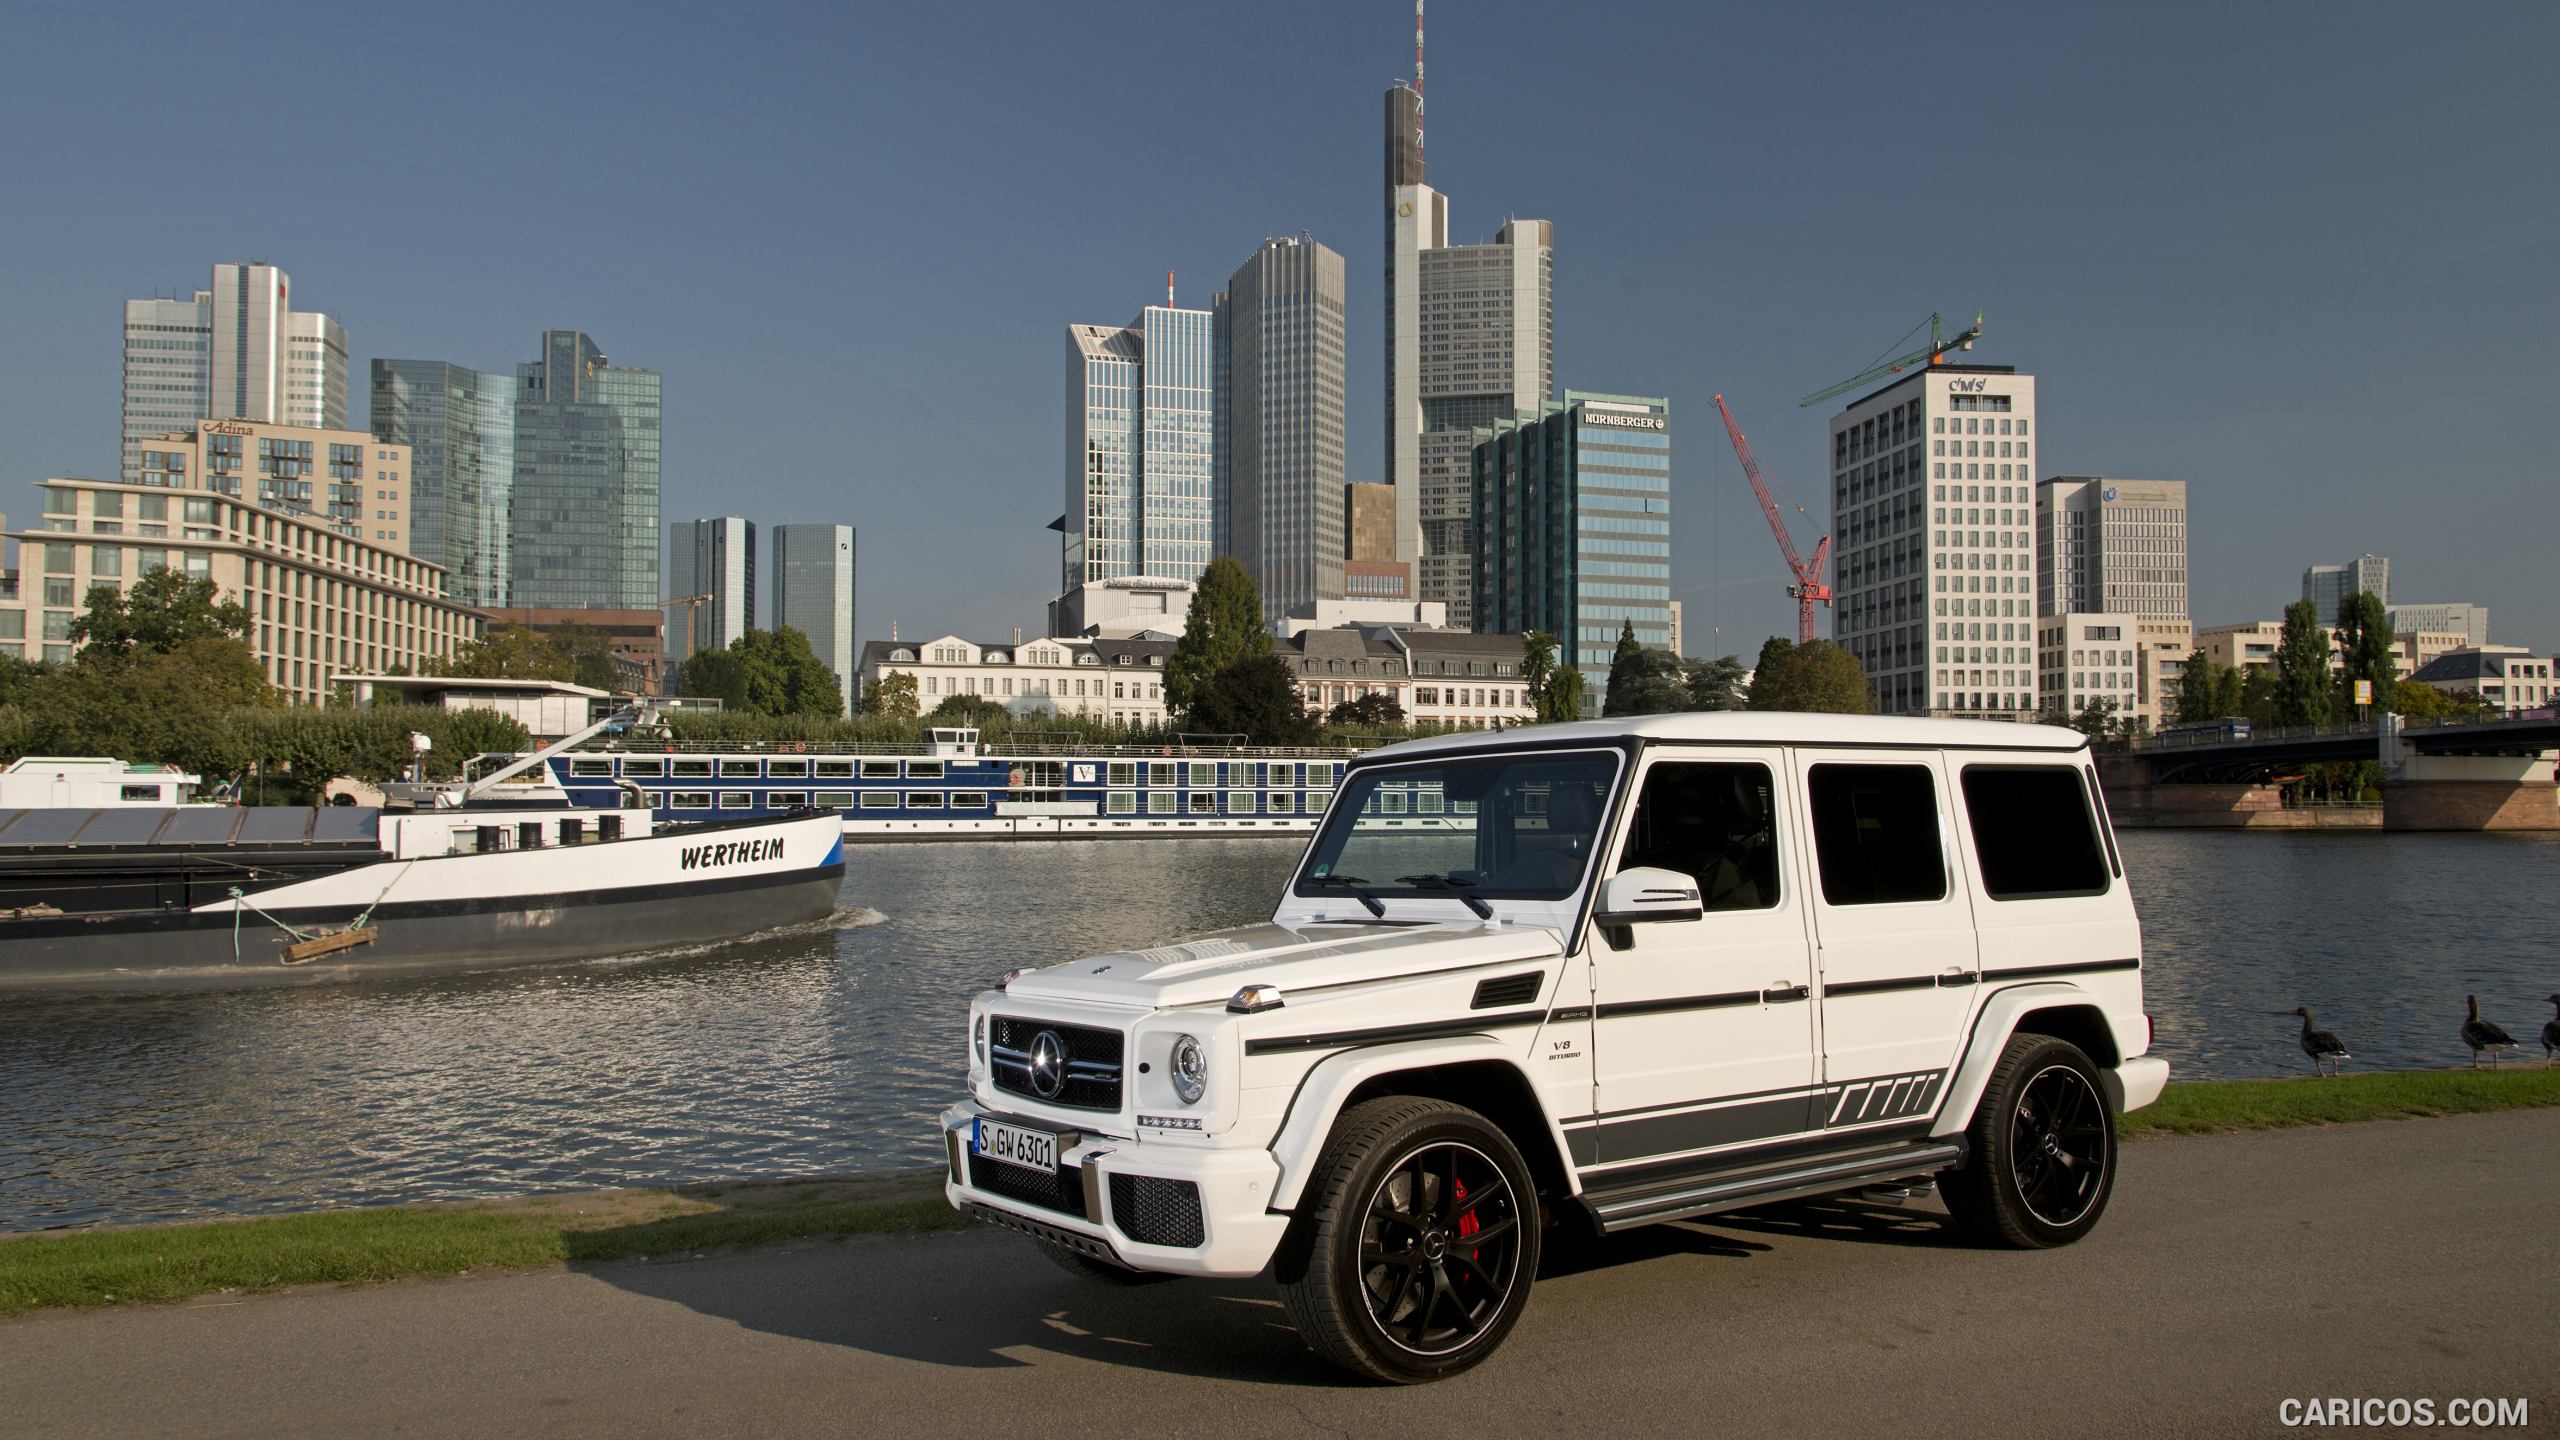 2016 Mercedes-AMG G63 AMG EDITION 463 in Polarwhite - Front, #37 of 48